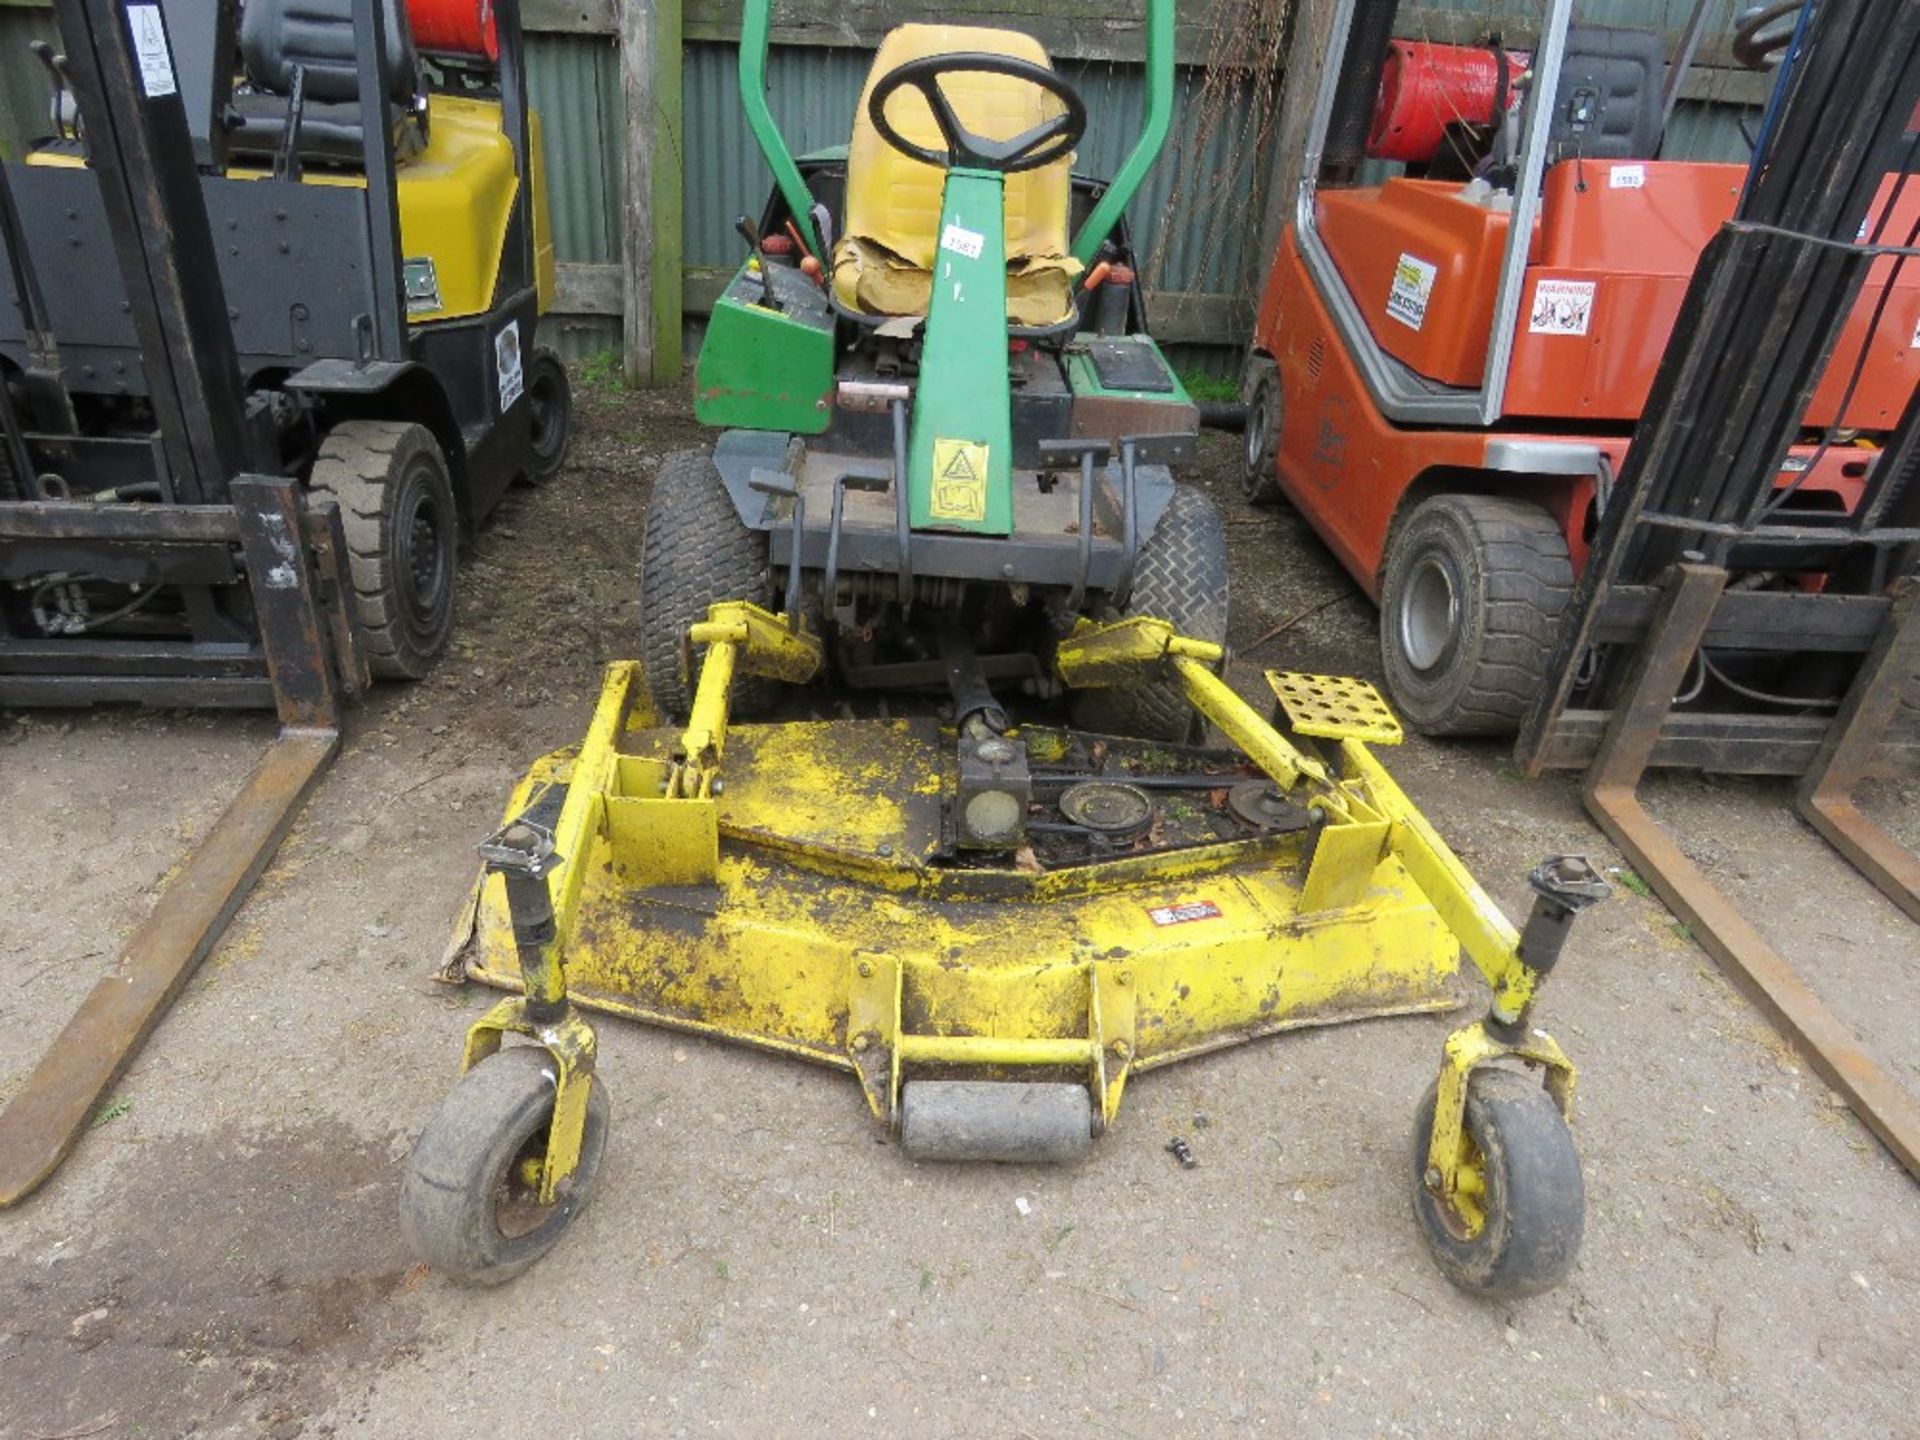 JOHN DEERE 1145 4WD OUT FRONT ROTARY MOWER. WHEN TESTED WAS SEEN TO START, RUN, DRIVE AND MOWER ENGA - Image 2 of 11